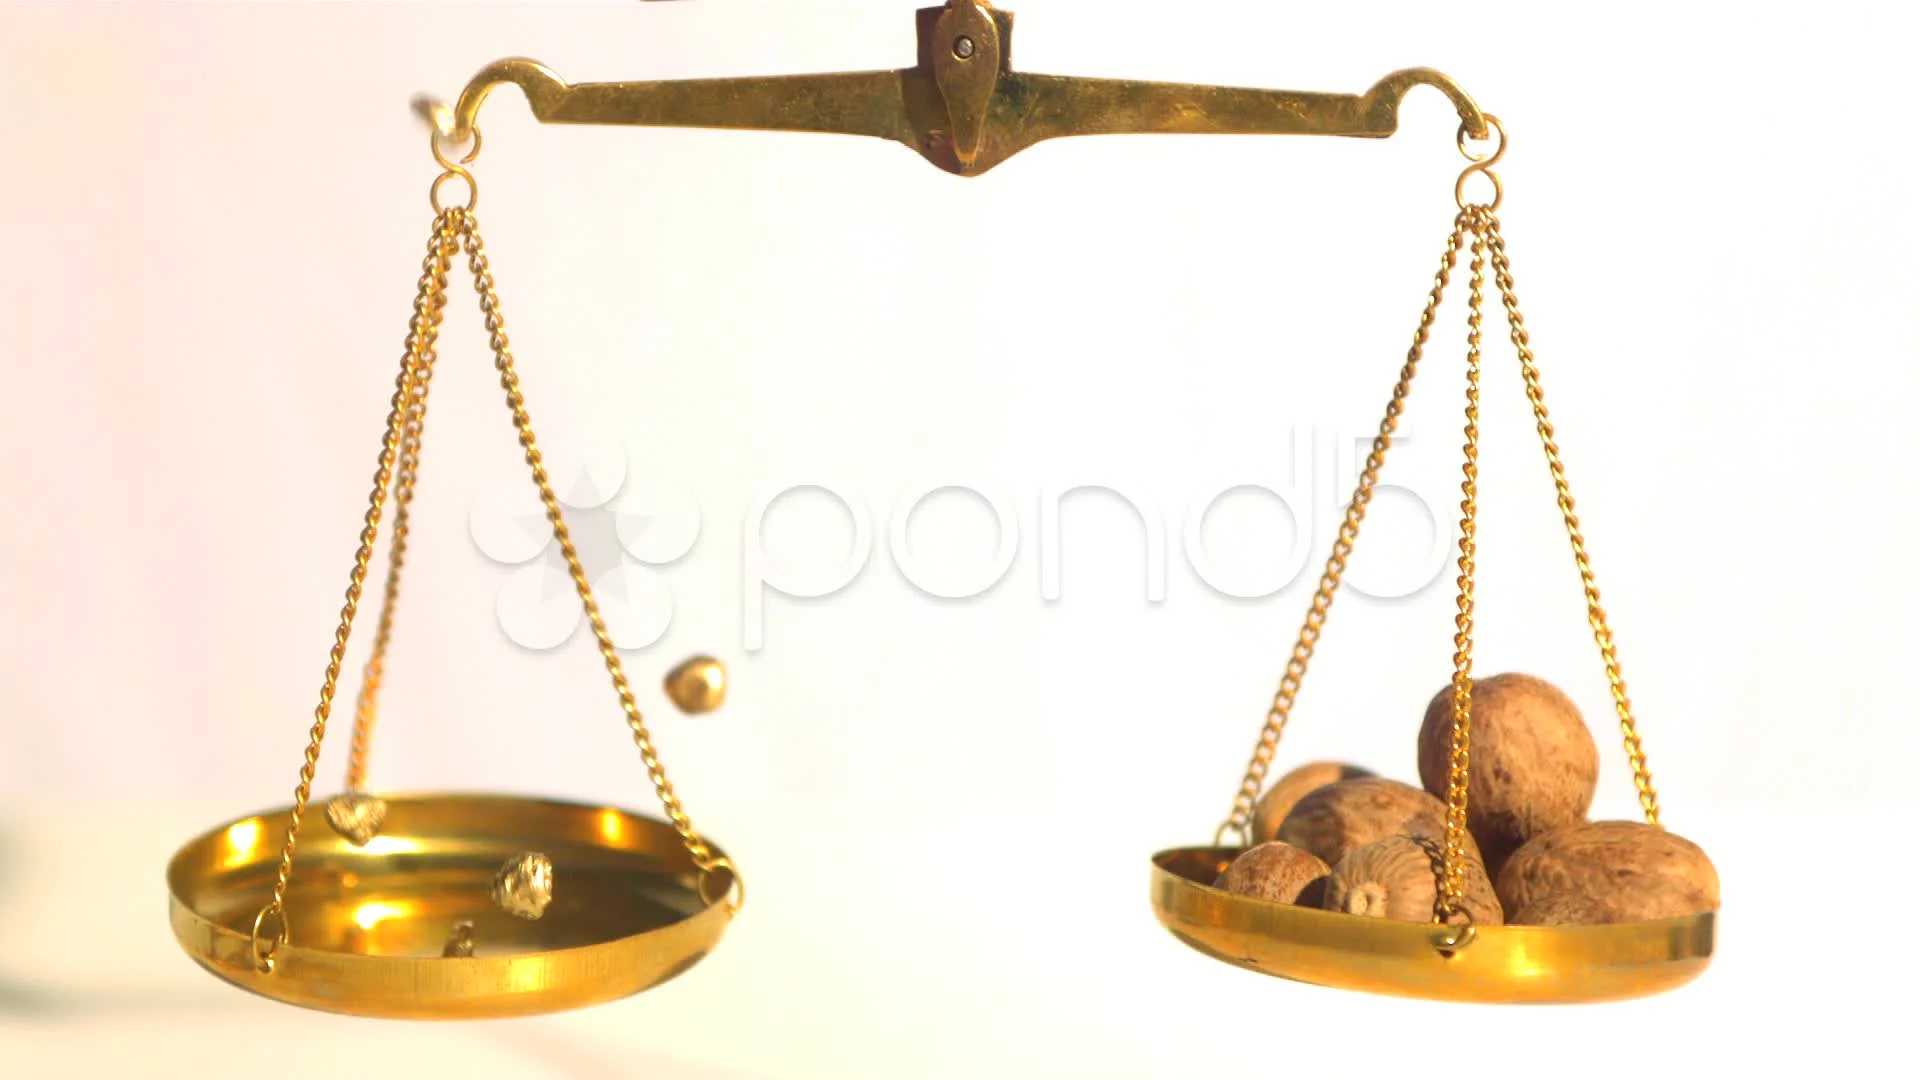 https://images.pond5.com/gold-nuggets-falling-weighing-scale-013228693_prevstill.jpeg